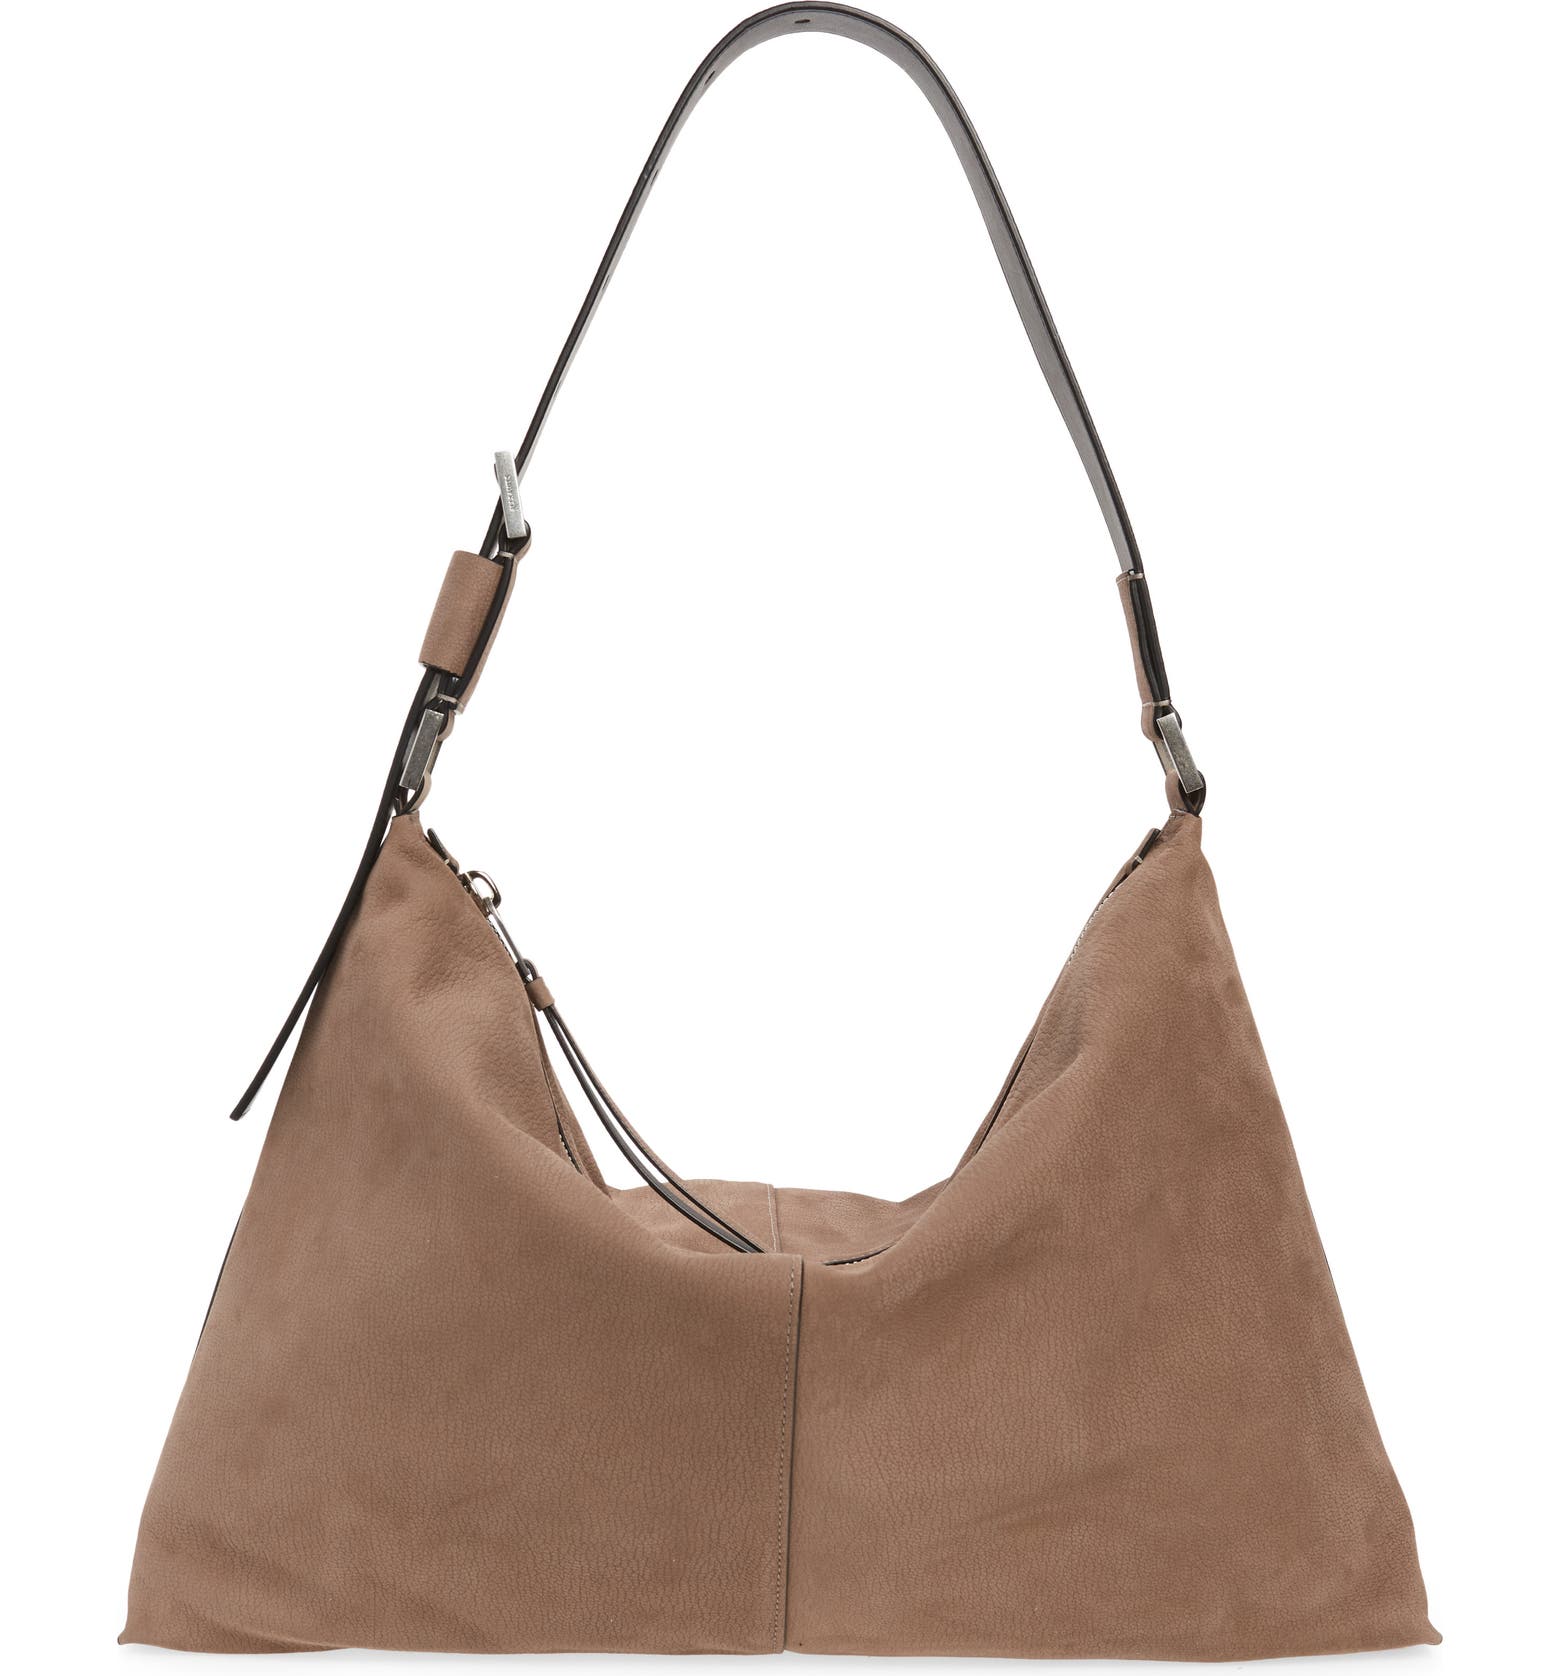 This Dagne Dover Bag Is The Holy Grail Of Canvas Totes—And It's Over 30%  Off During Nordstrom's Anniversary Sale - Forbes Vetted